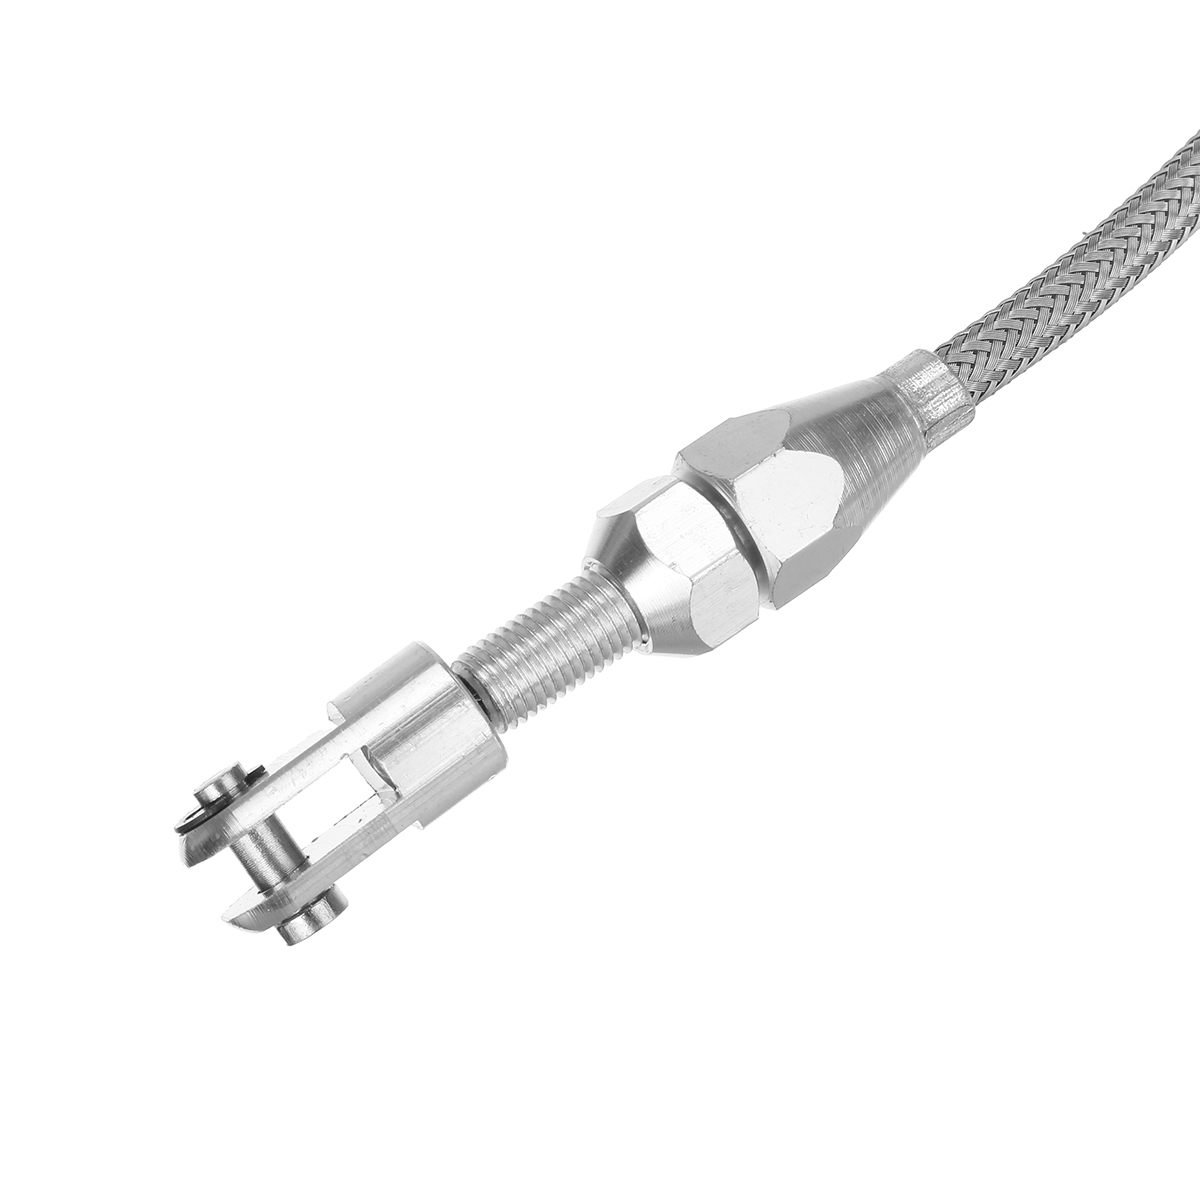 36" Stainless Steel Throttle Cable Replacement for LS LS1 Engine 4.8 5.3 5.7 6.0